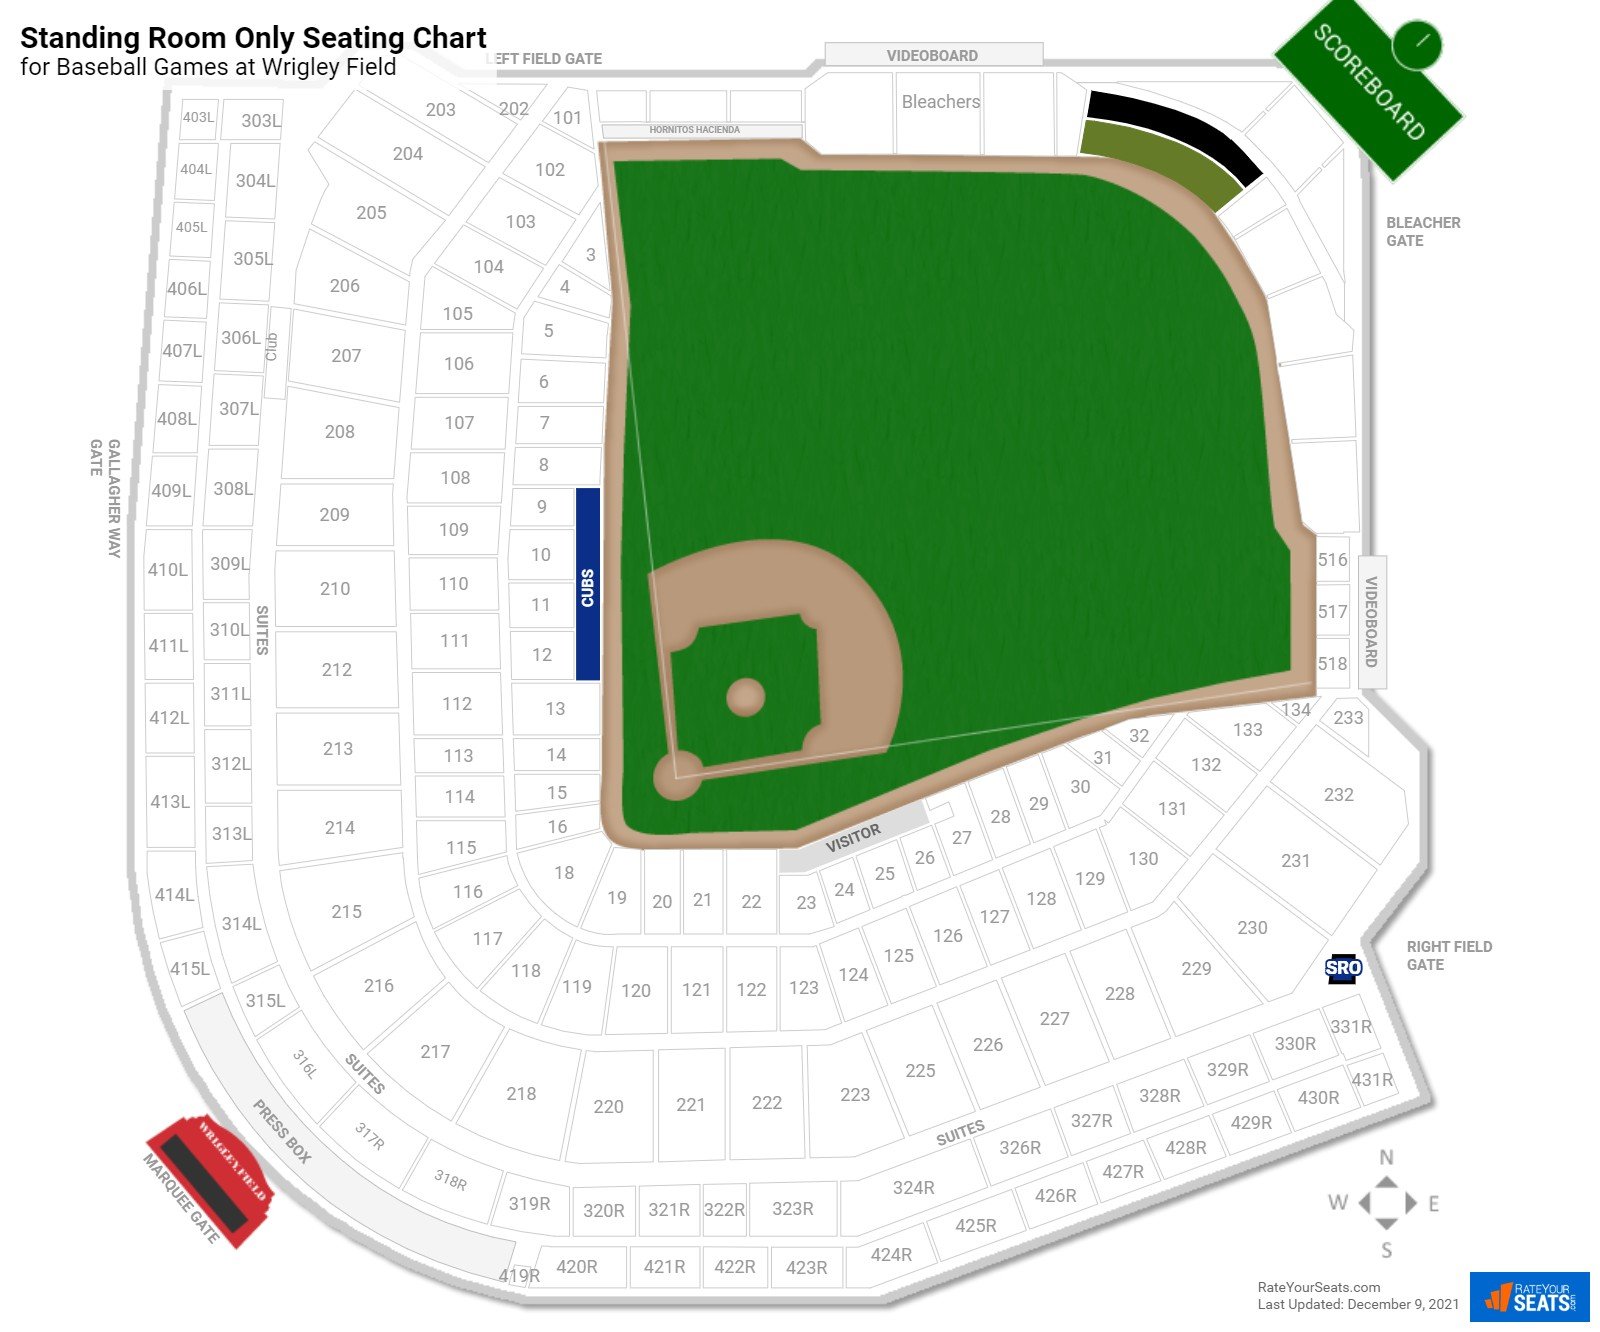 Baseball Standing Room Only Seating Chart at Wrigley Field